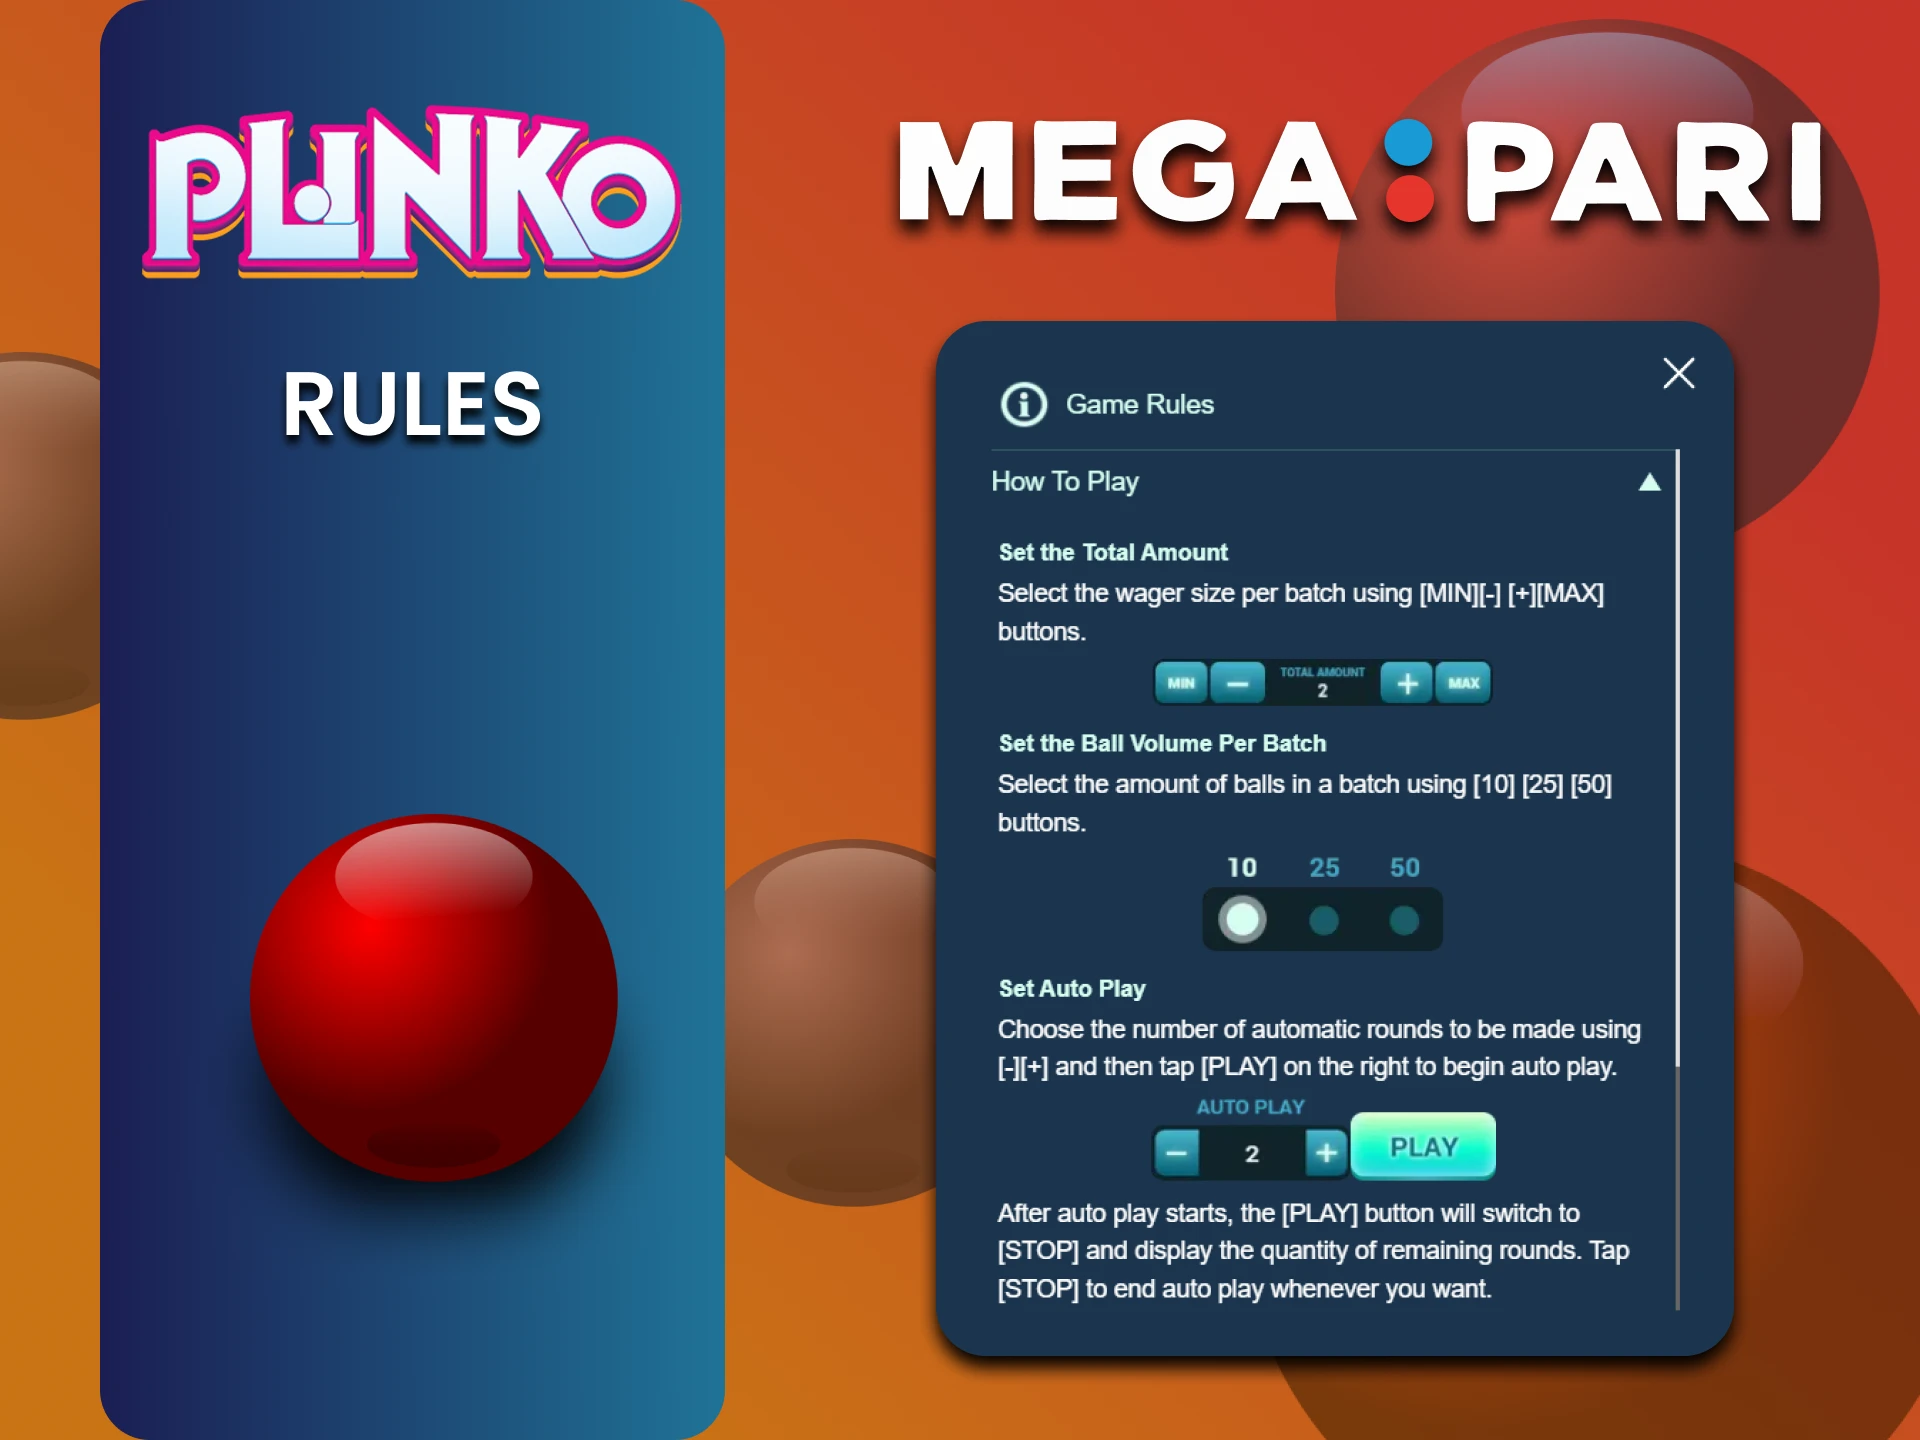 Learn the rules of playing Plinko on Megapari.